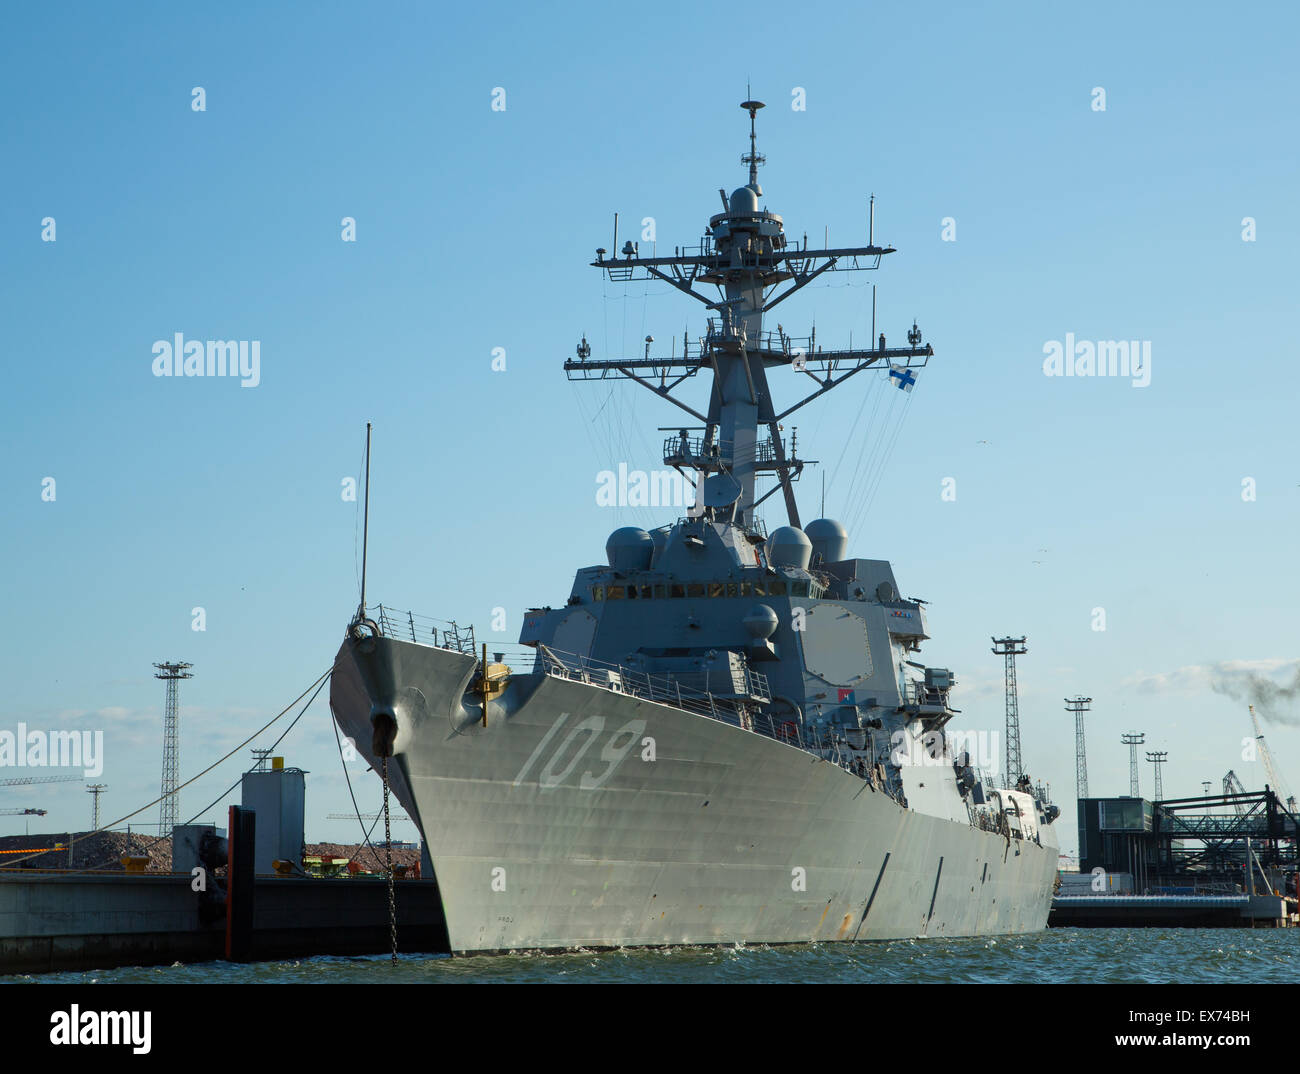 USS Jason Dunham, an Arleigh Burke-class destroyer in the United States Navy, moored at the West Harbor of Helsinki, Finland. Stock Photo